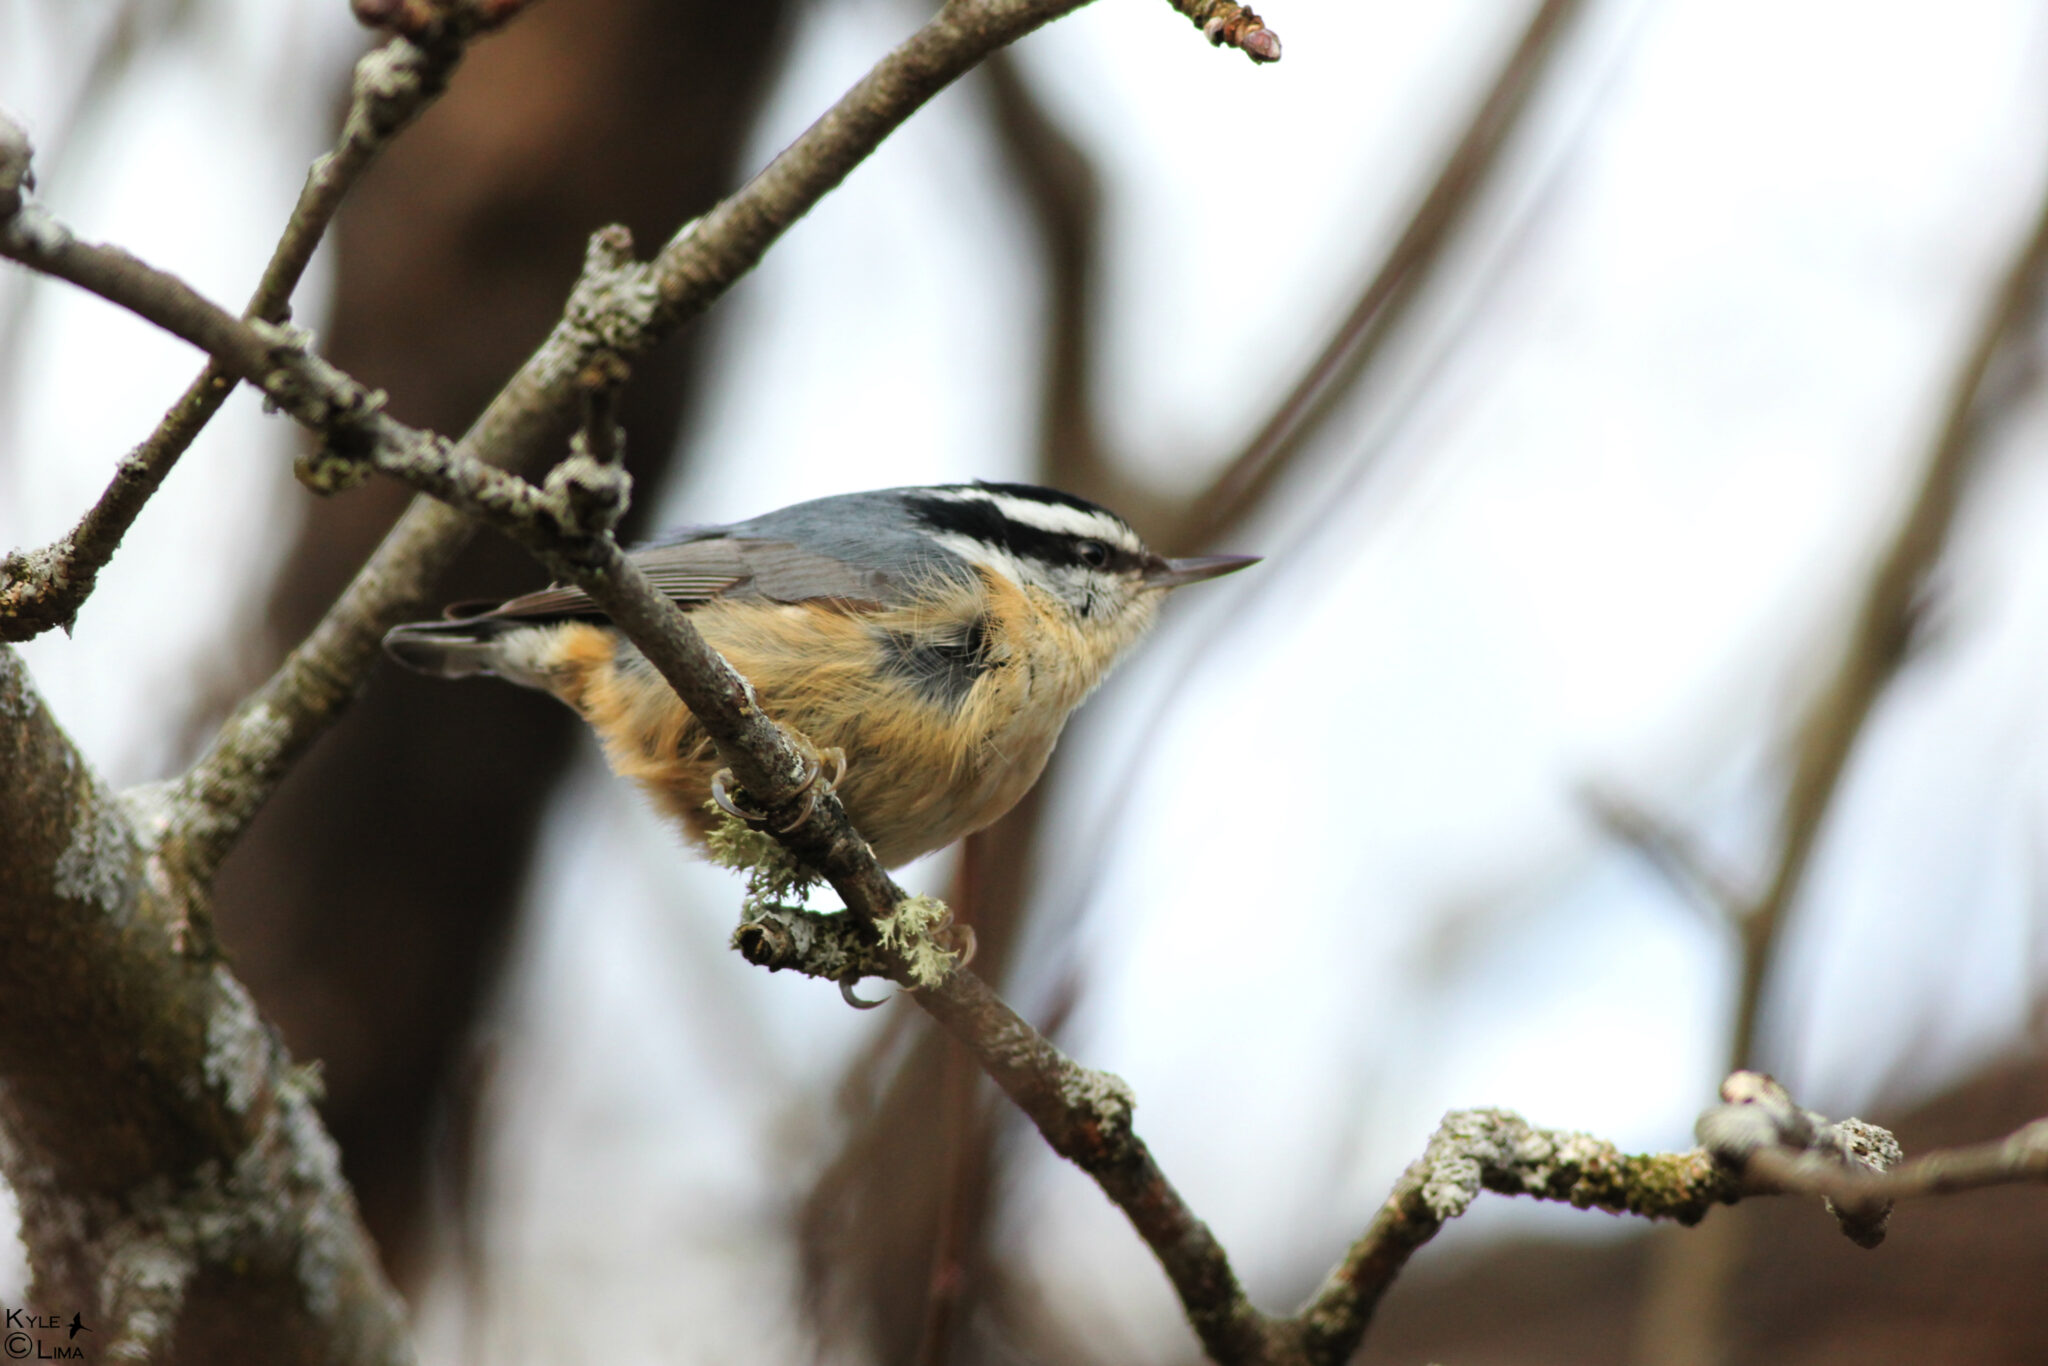 Red-breasted nuthatch perched on tree branch.